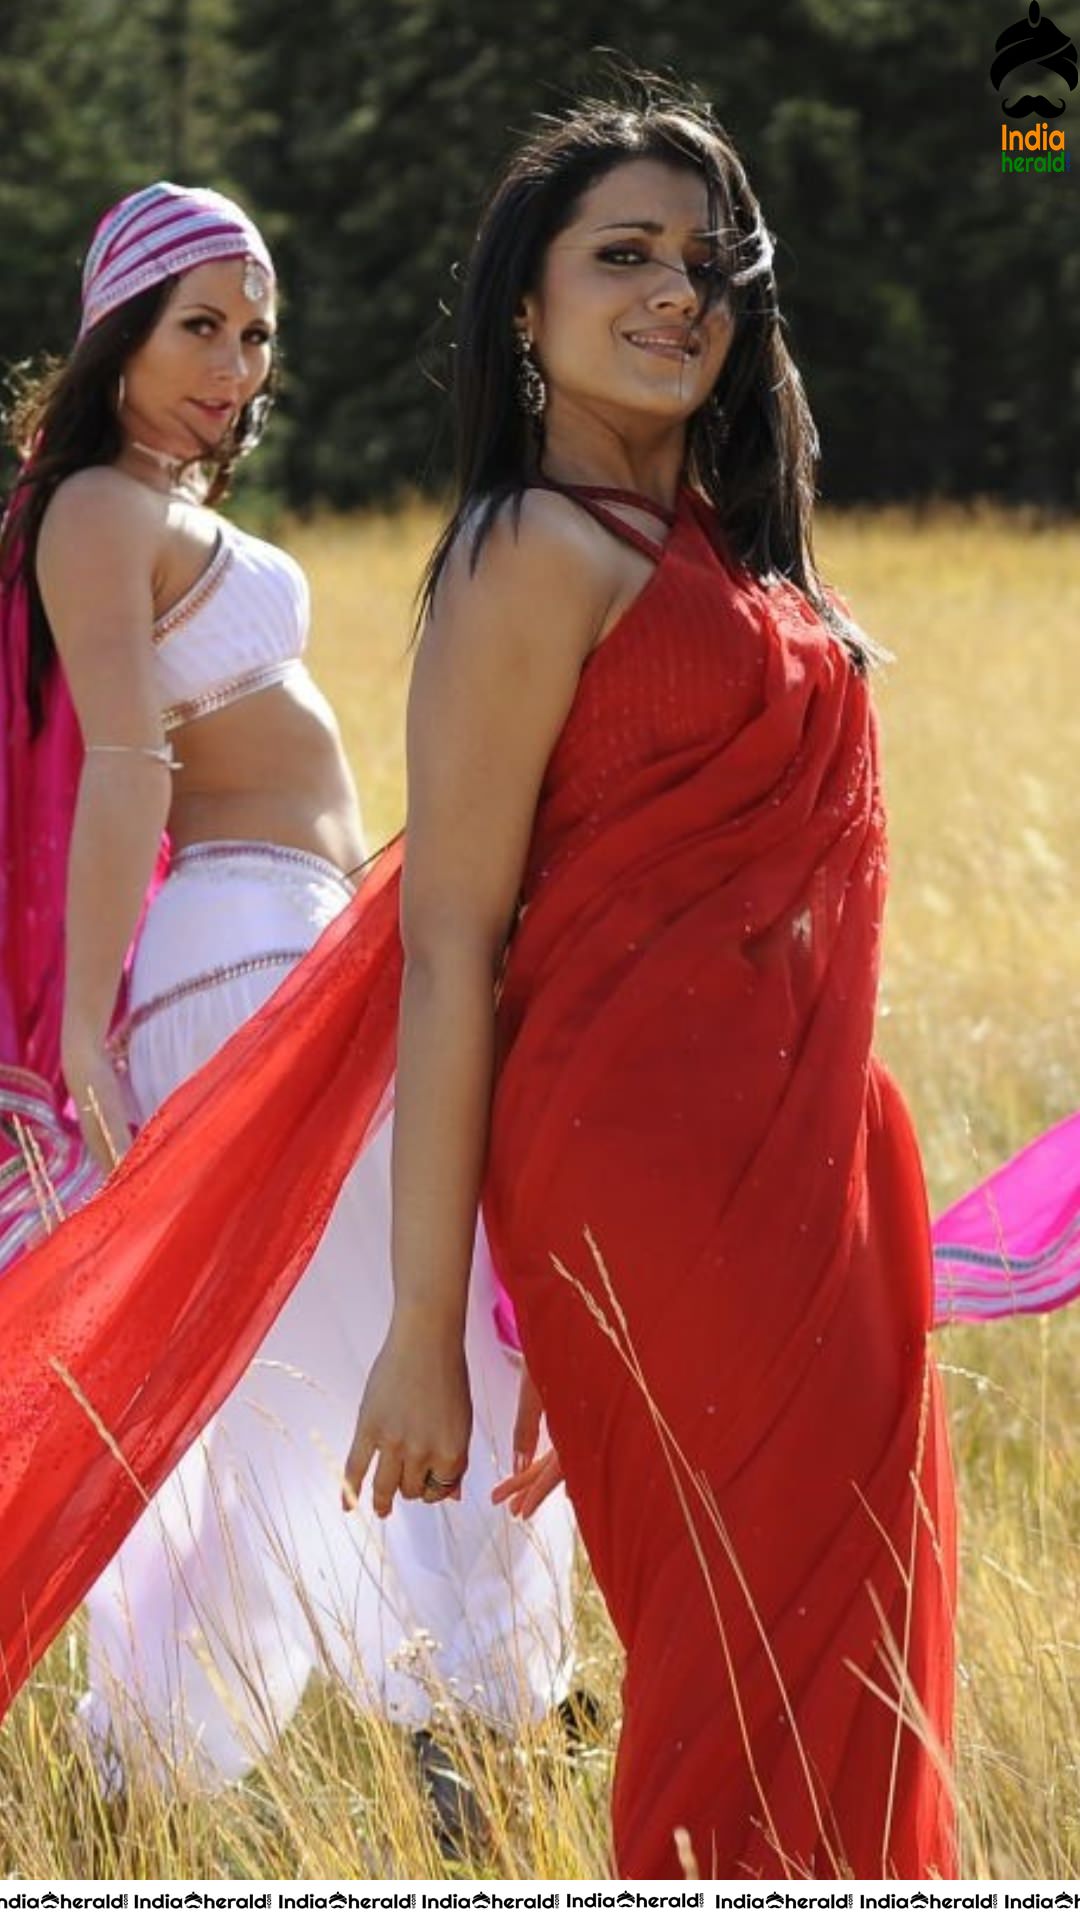 Trisha Red Hot Mood Erecting Photos where she exposes her tempting waist and navel Set 1